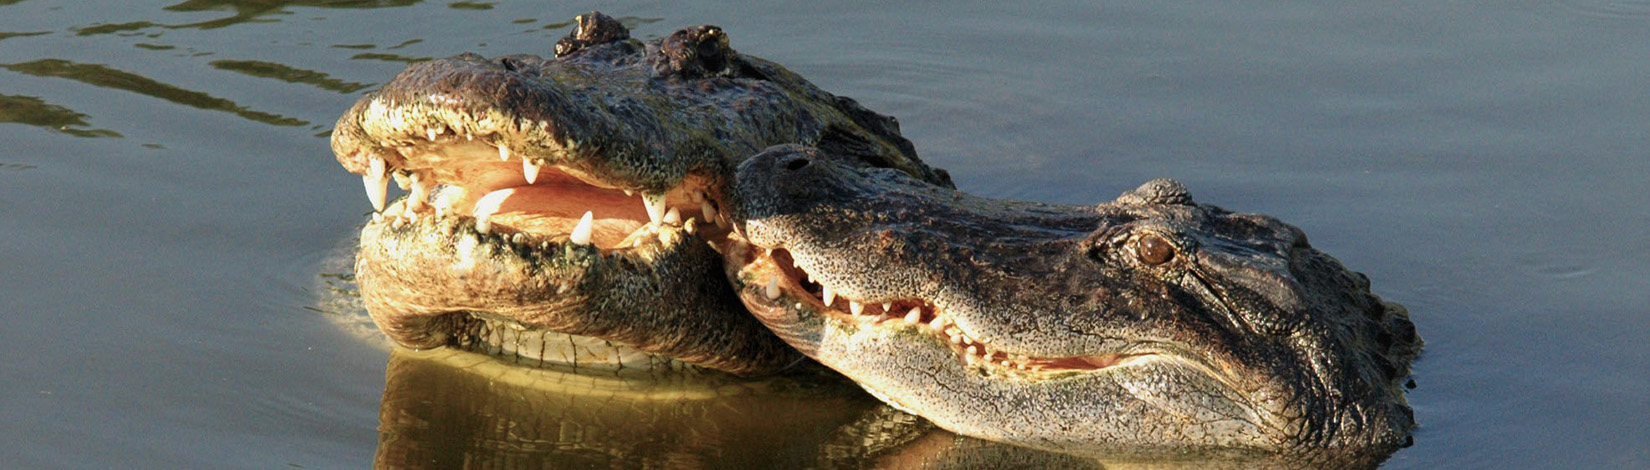 Photo of two alligator heads with noses touching